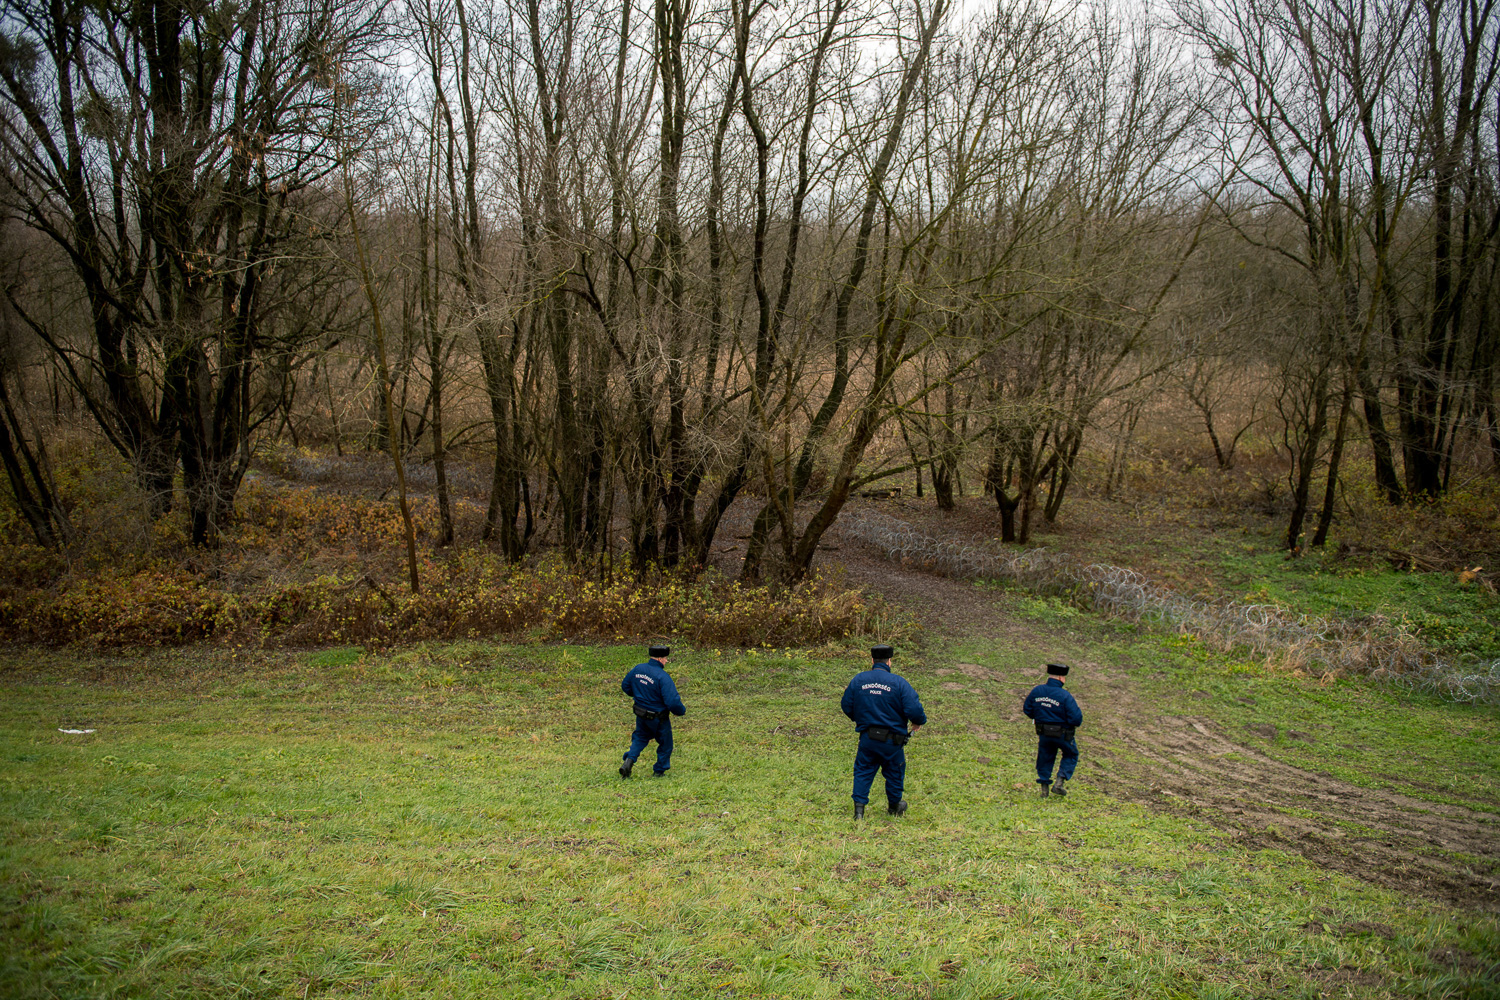  Policemen patroling near the barbed wire fence in the flood basin of Danube near Kölked, Hungary 9 December 2017. The fence was constructed in the middle of the European migration crisis in 2015, with the aim to ensure border security by preventing 